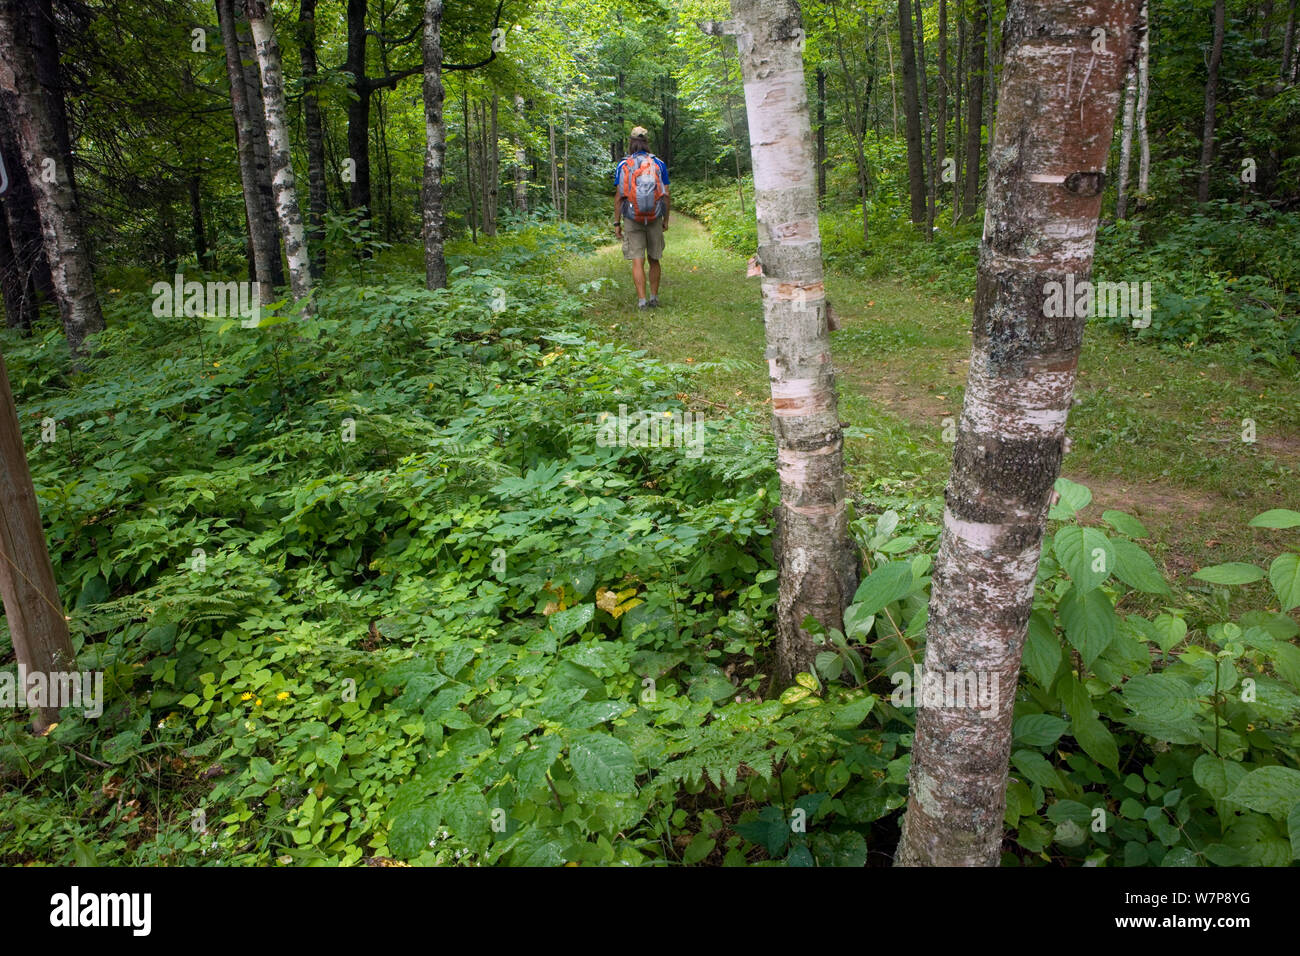 Hiker on the Silver Trail / North Country Trail in Jay Cook State Park. Minnesota, USA, August 2011 Model released Stock Photo